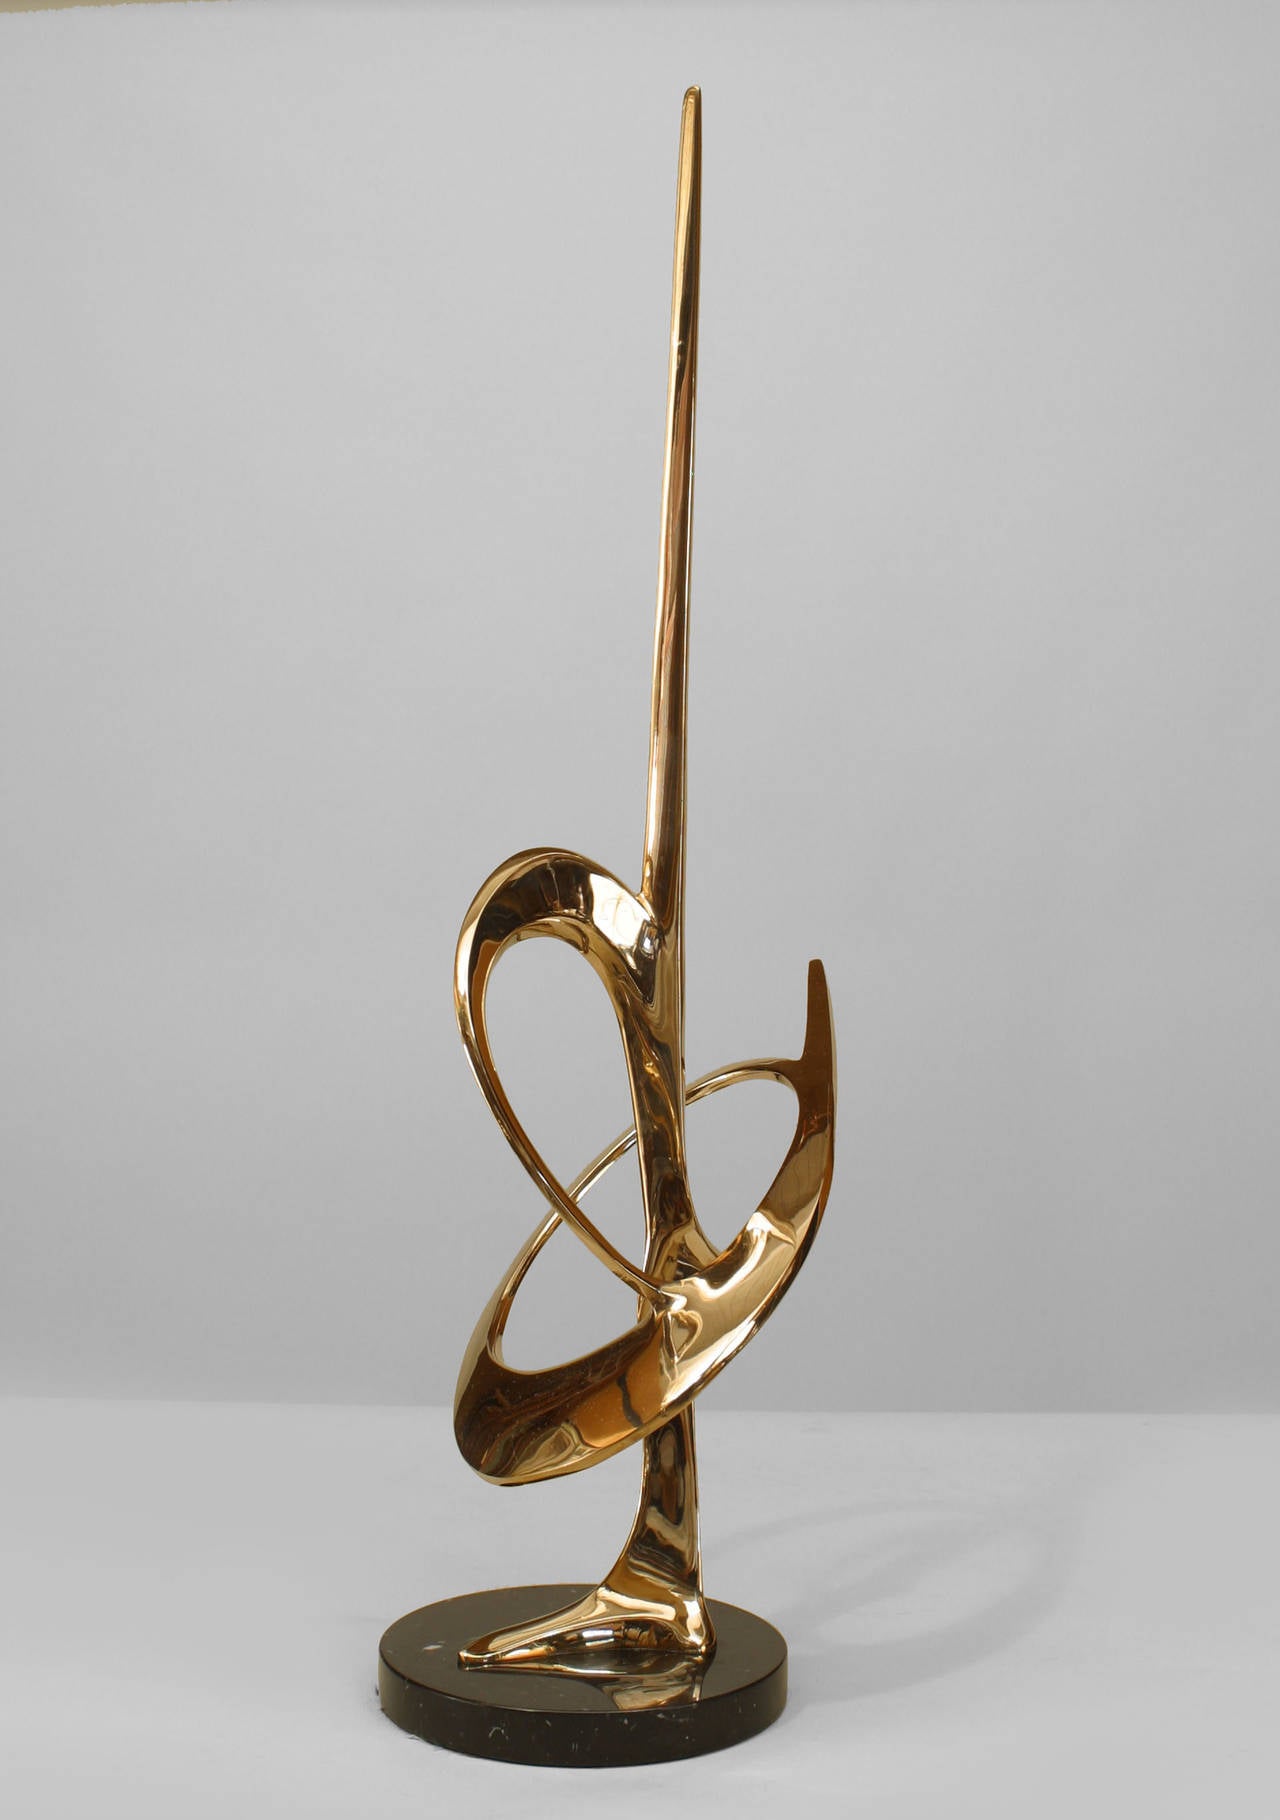 Created by American artist Bob Bennett in 1985, this untitled abstract vertical brass sculpture shows a stylized rod piercing an open oval form on a round black marble base.